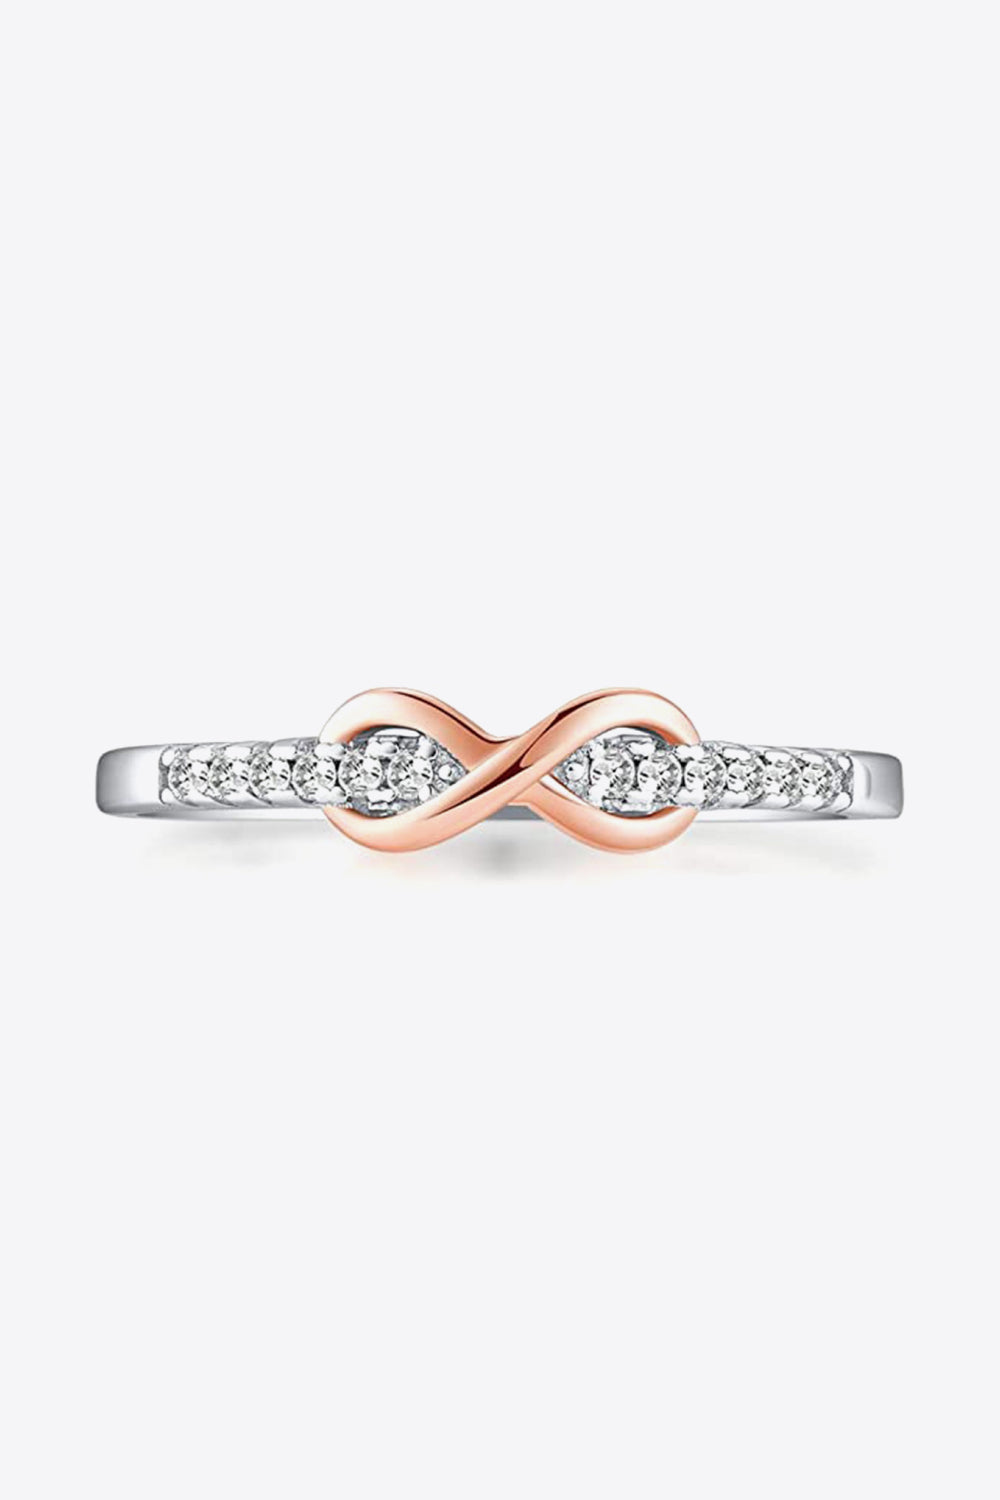 Contrast Zircon 925 Sterling Silver with Rose Gold Accents Ring Ti Amo I love you